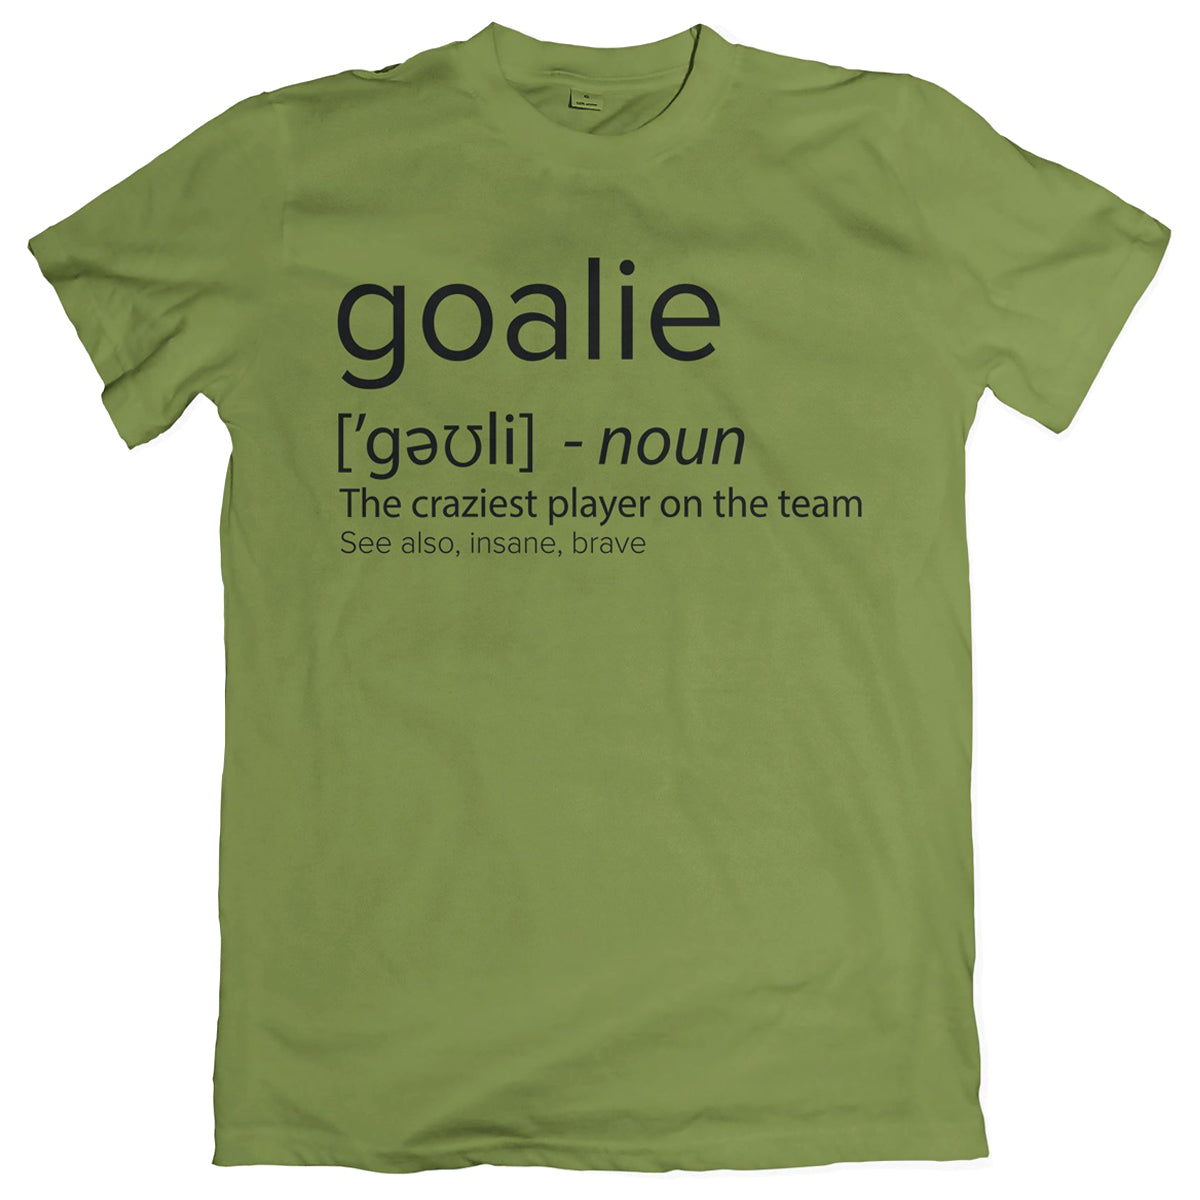 Goalie Definition T-Shirt Shirts 411 Youth Small Olive 